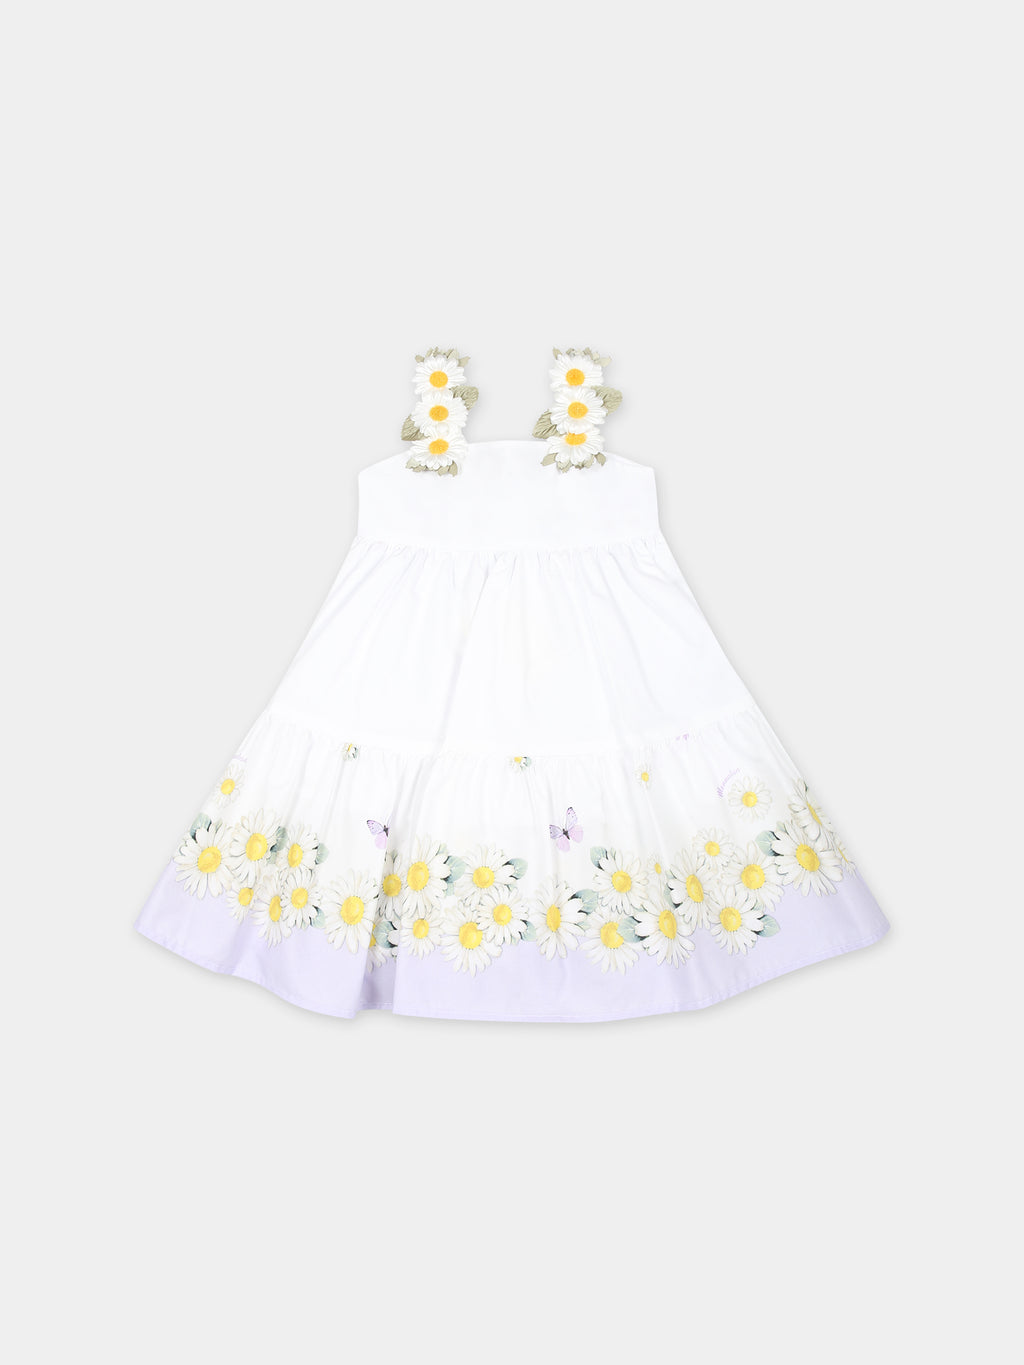 White dress for baby girl with daisies